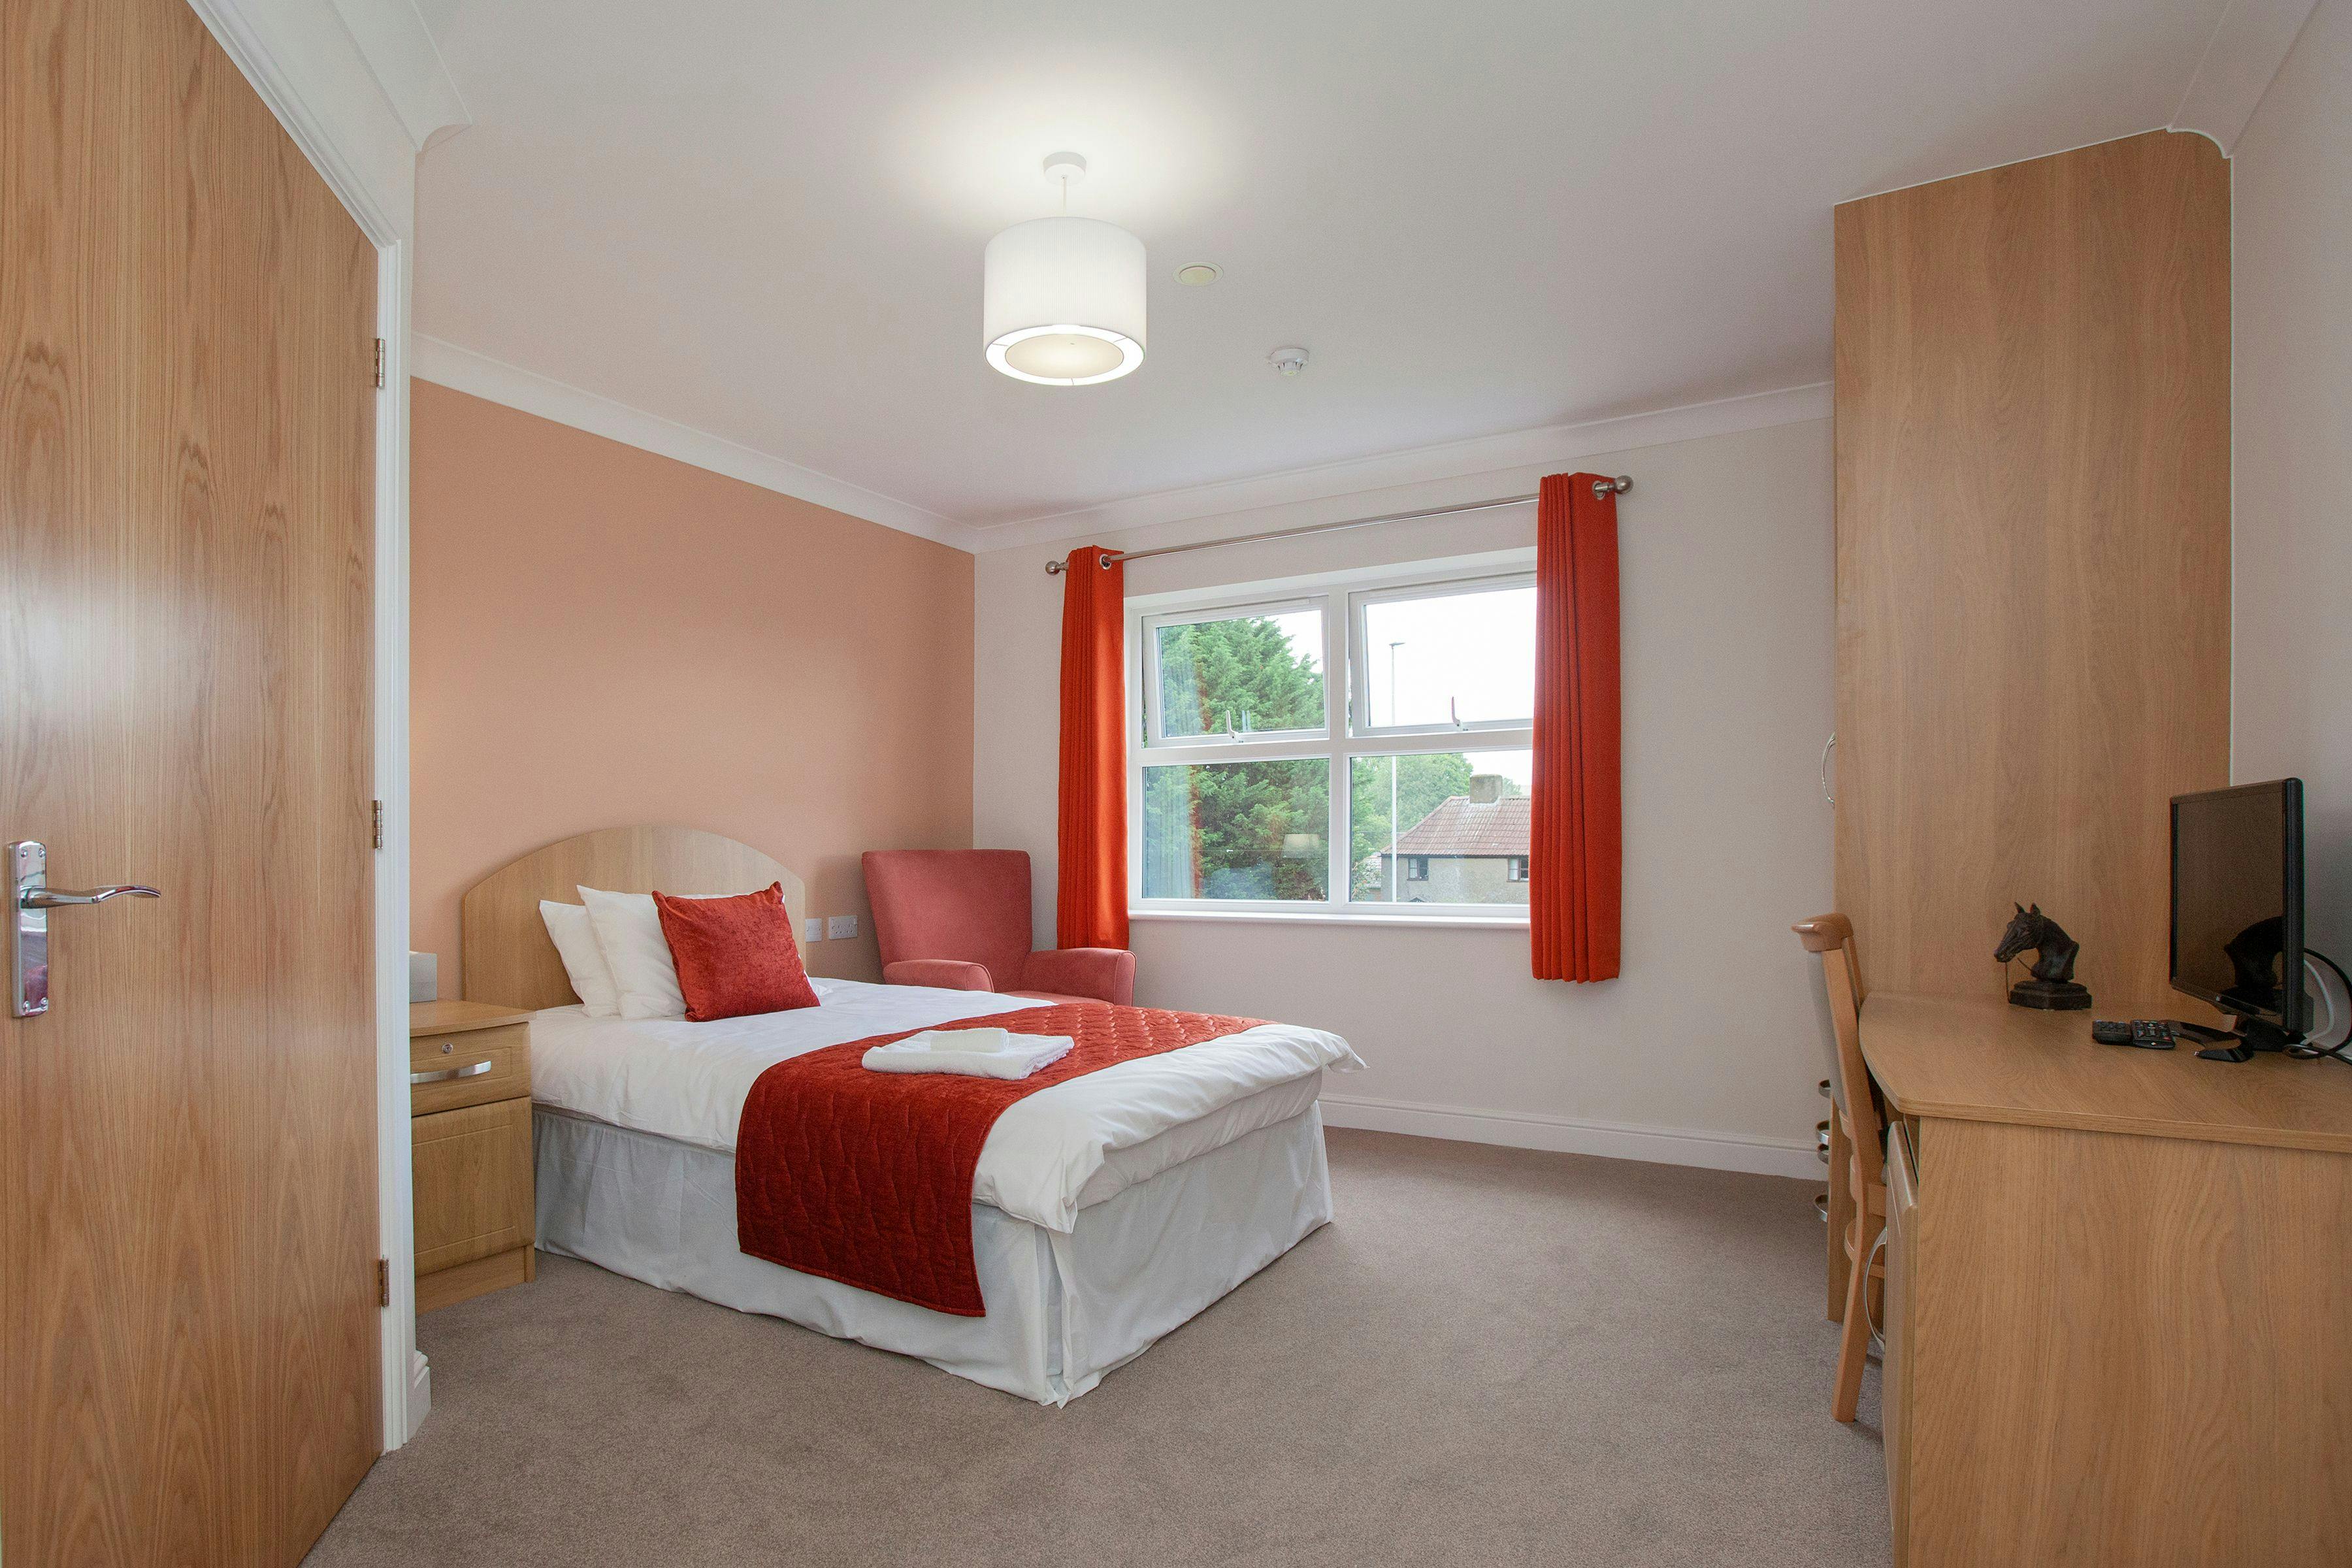 Bedroom at Briggs Lodge Care Home in Devizes, Wiltshire